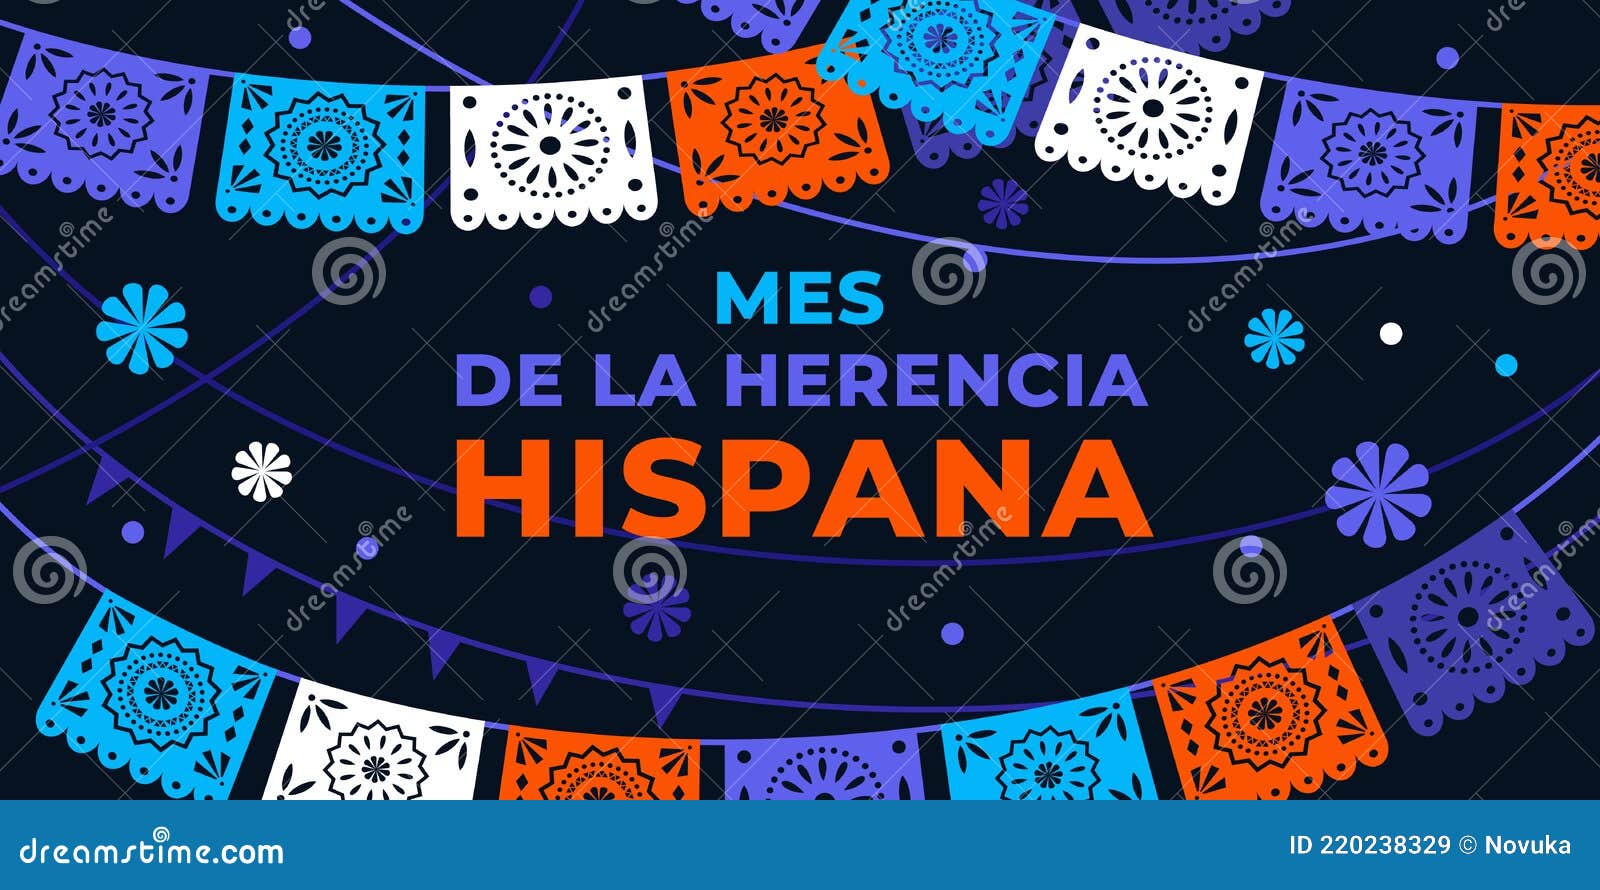 hispanic heritage month.  web banner, poster, card for social media, networks. greeting in spanish mes de la herencia